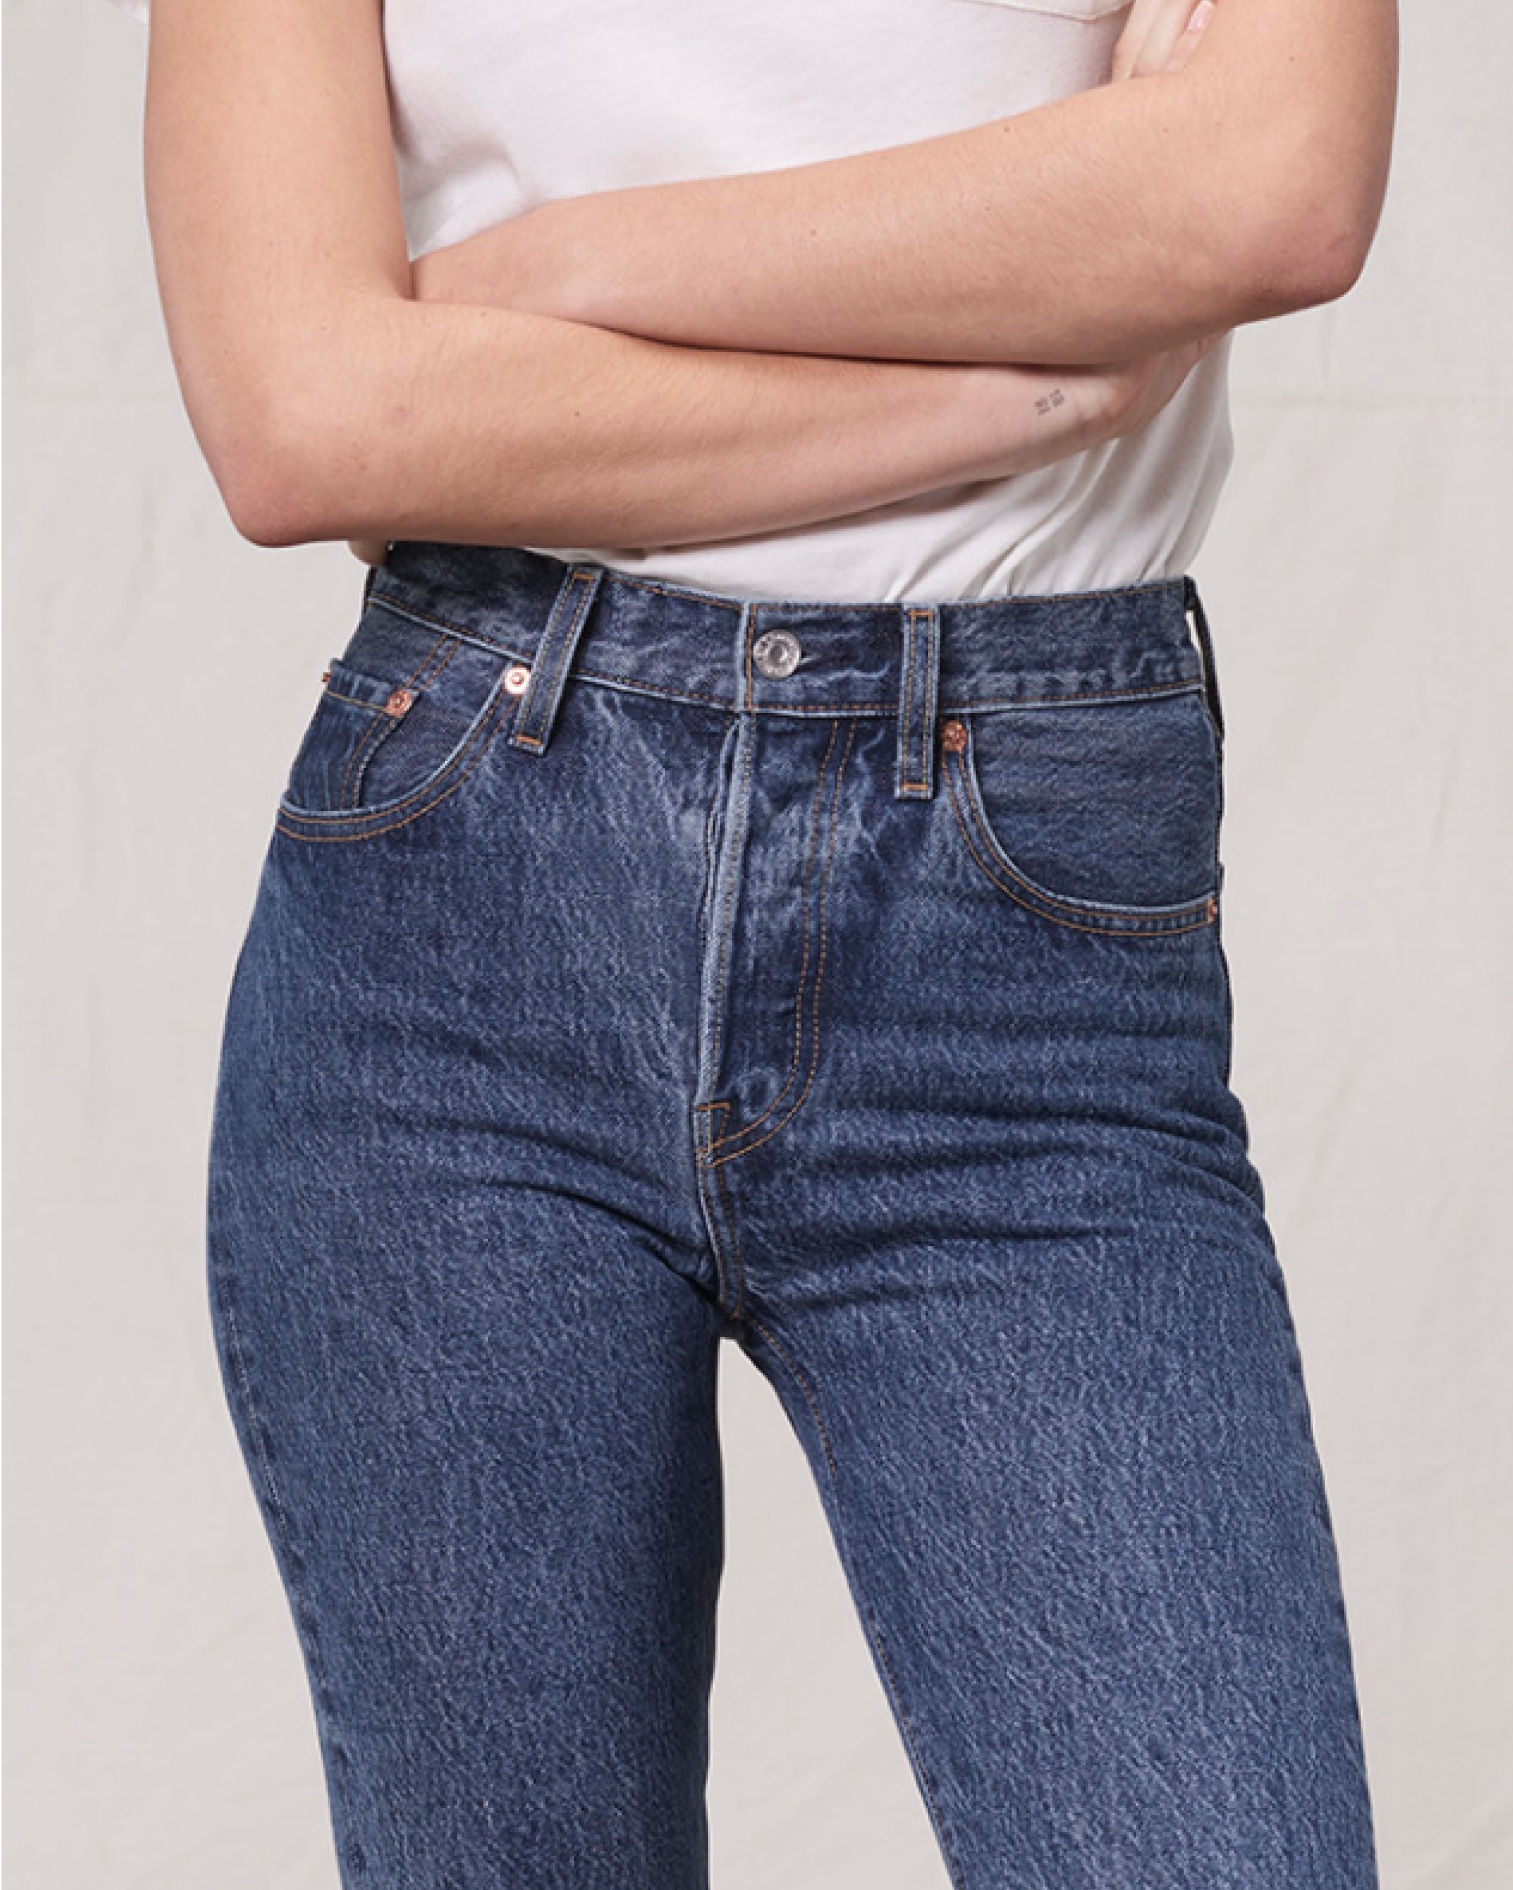 Levi's 501® Jeans for Women - The 